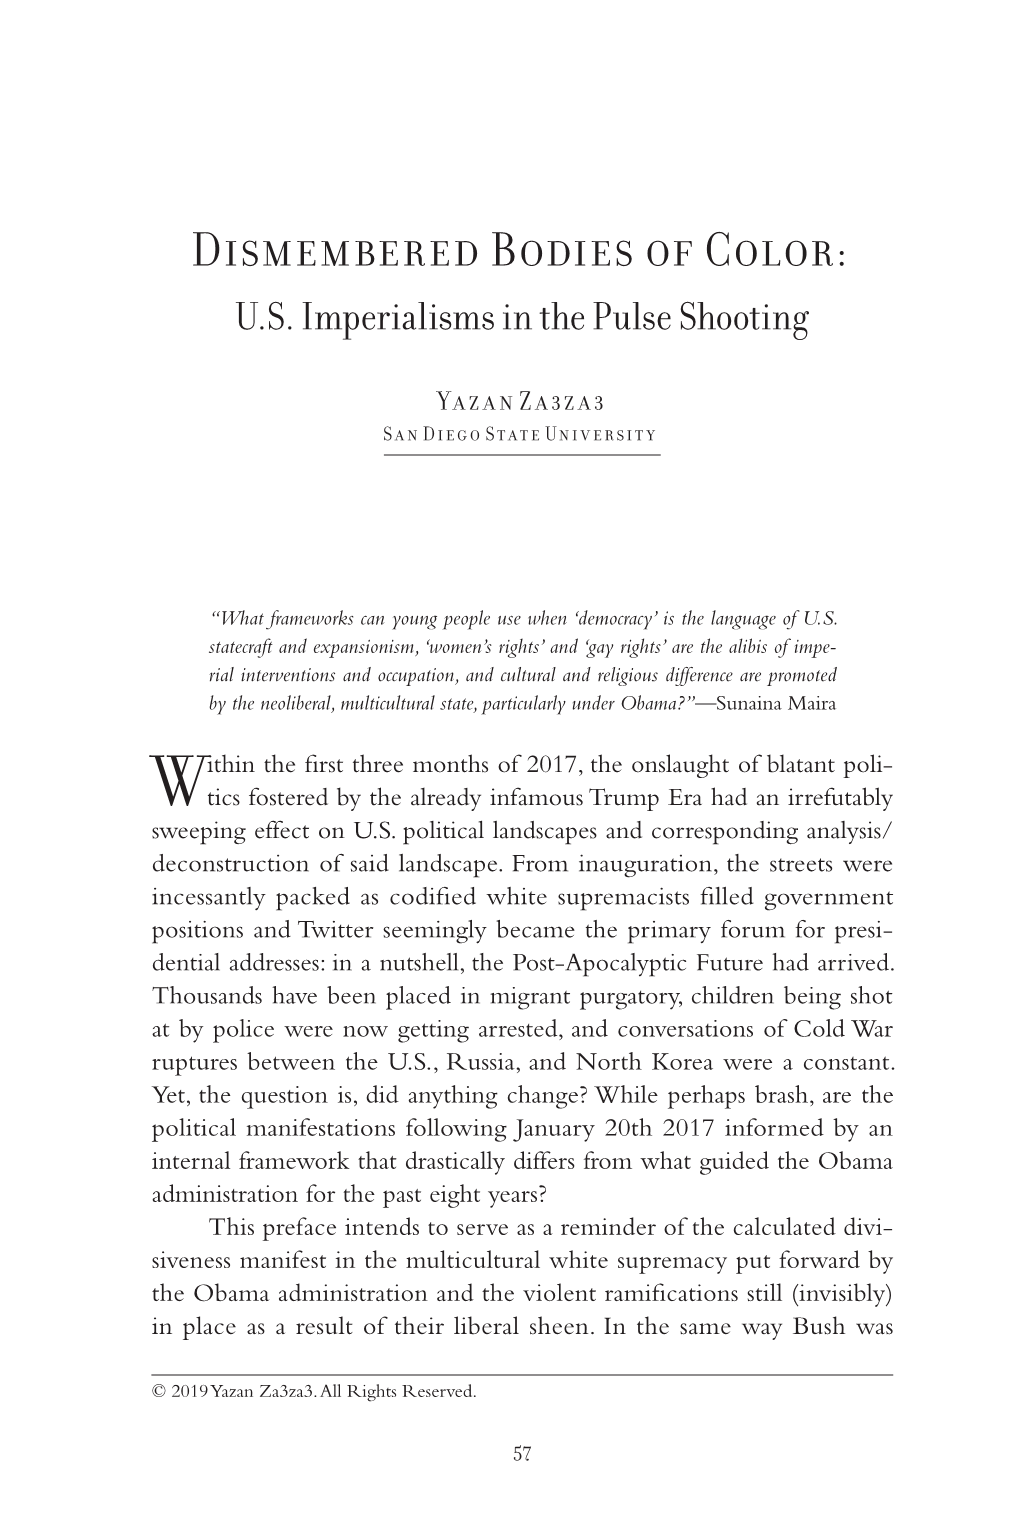 US Imperialisms in the Pulse Shooting